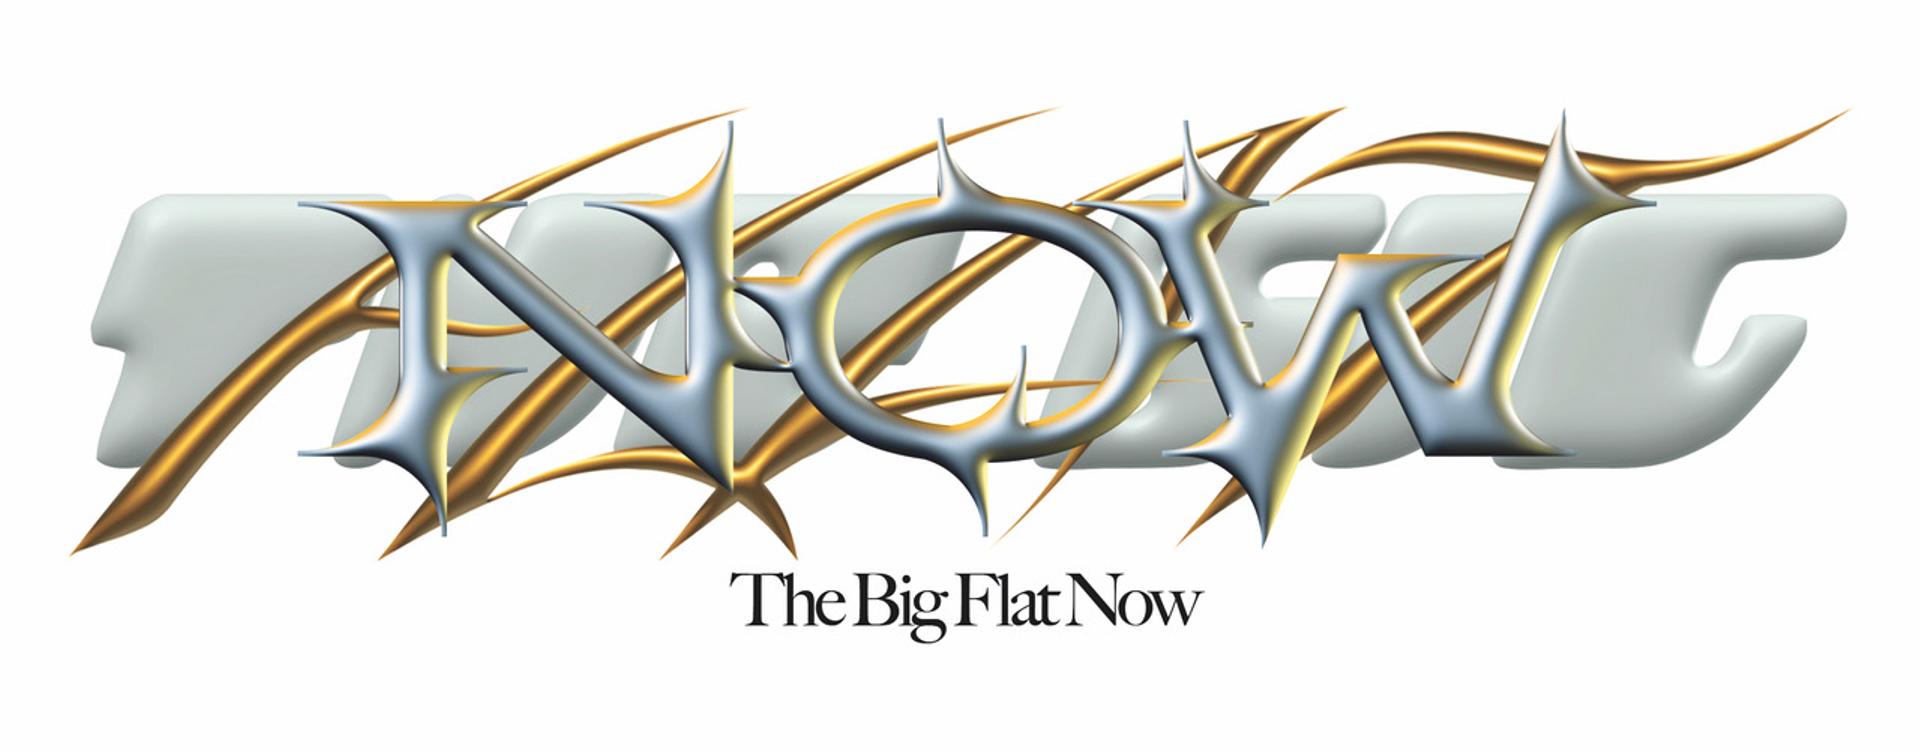 We regret to inform you that there is no future. Nor is there a past. Music, art, technology, pop culture, and fashion have evaporated as well. There is only one thing left: THE BIG FLAT NOW.